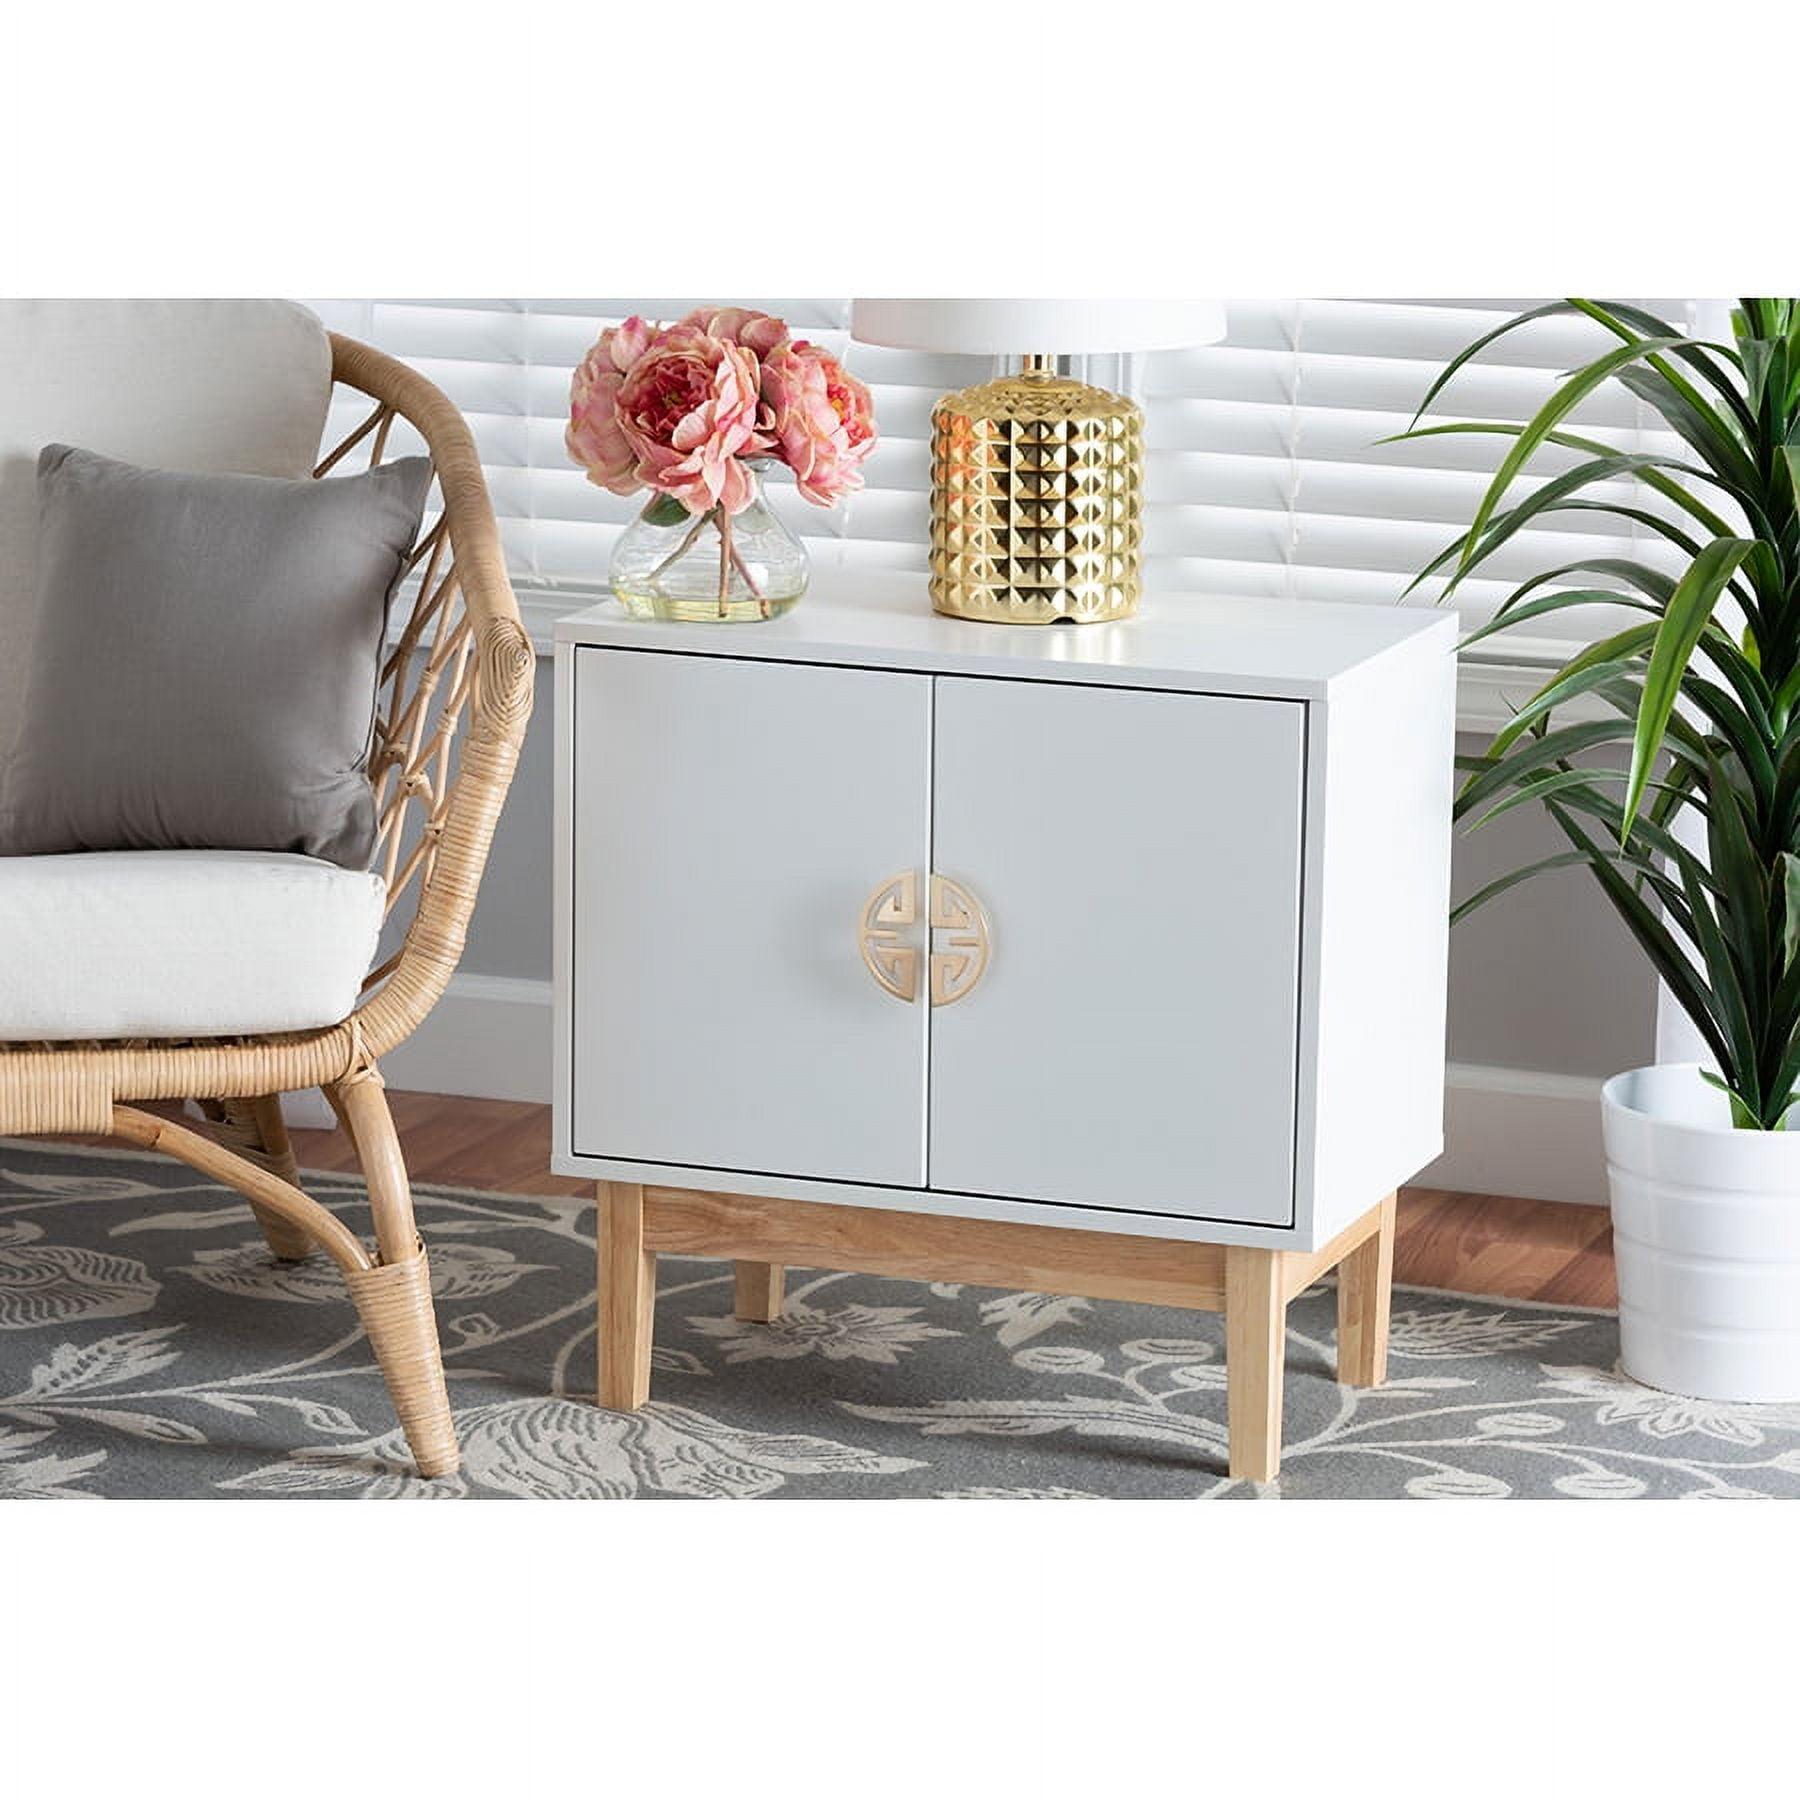 Kamana White and Oak Brown Wood with Gold Metal Lockable Storage Cabinet